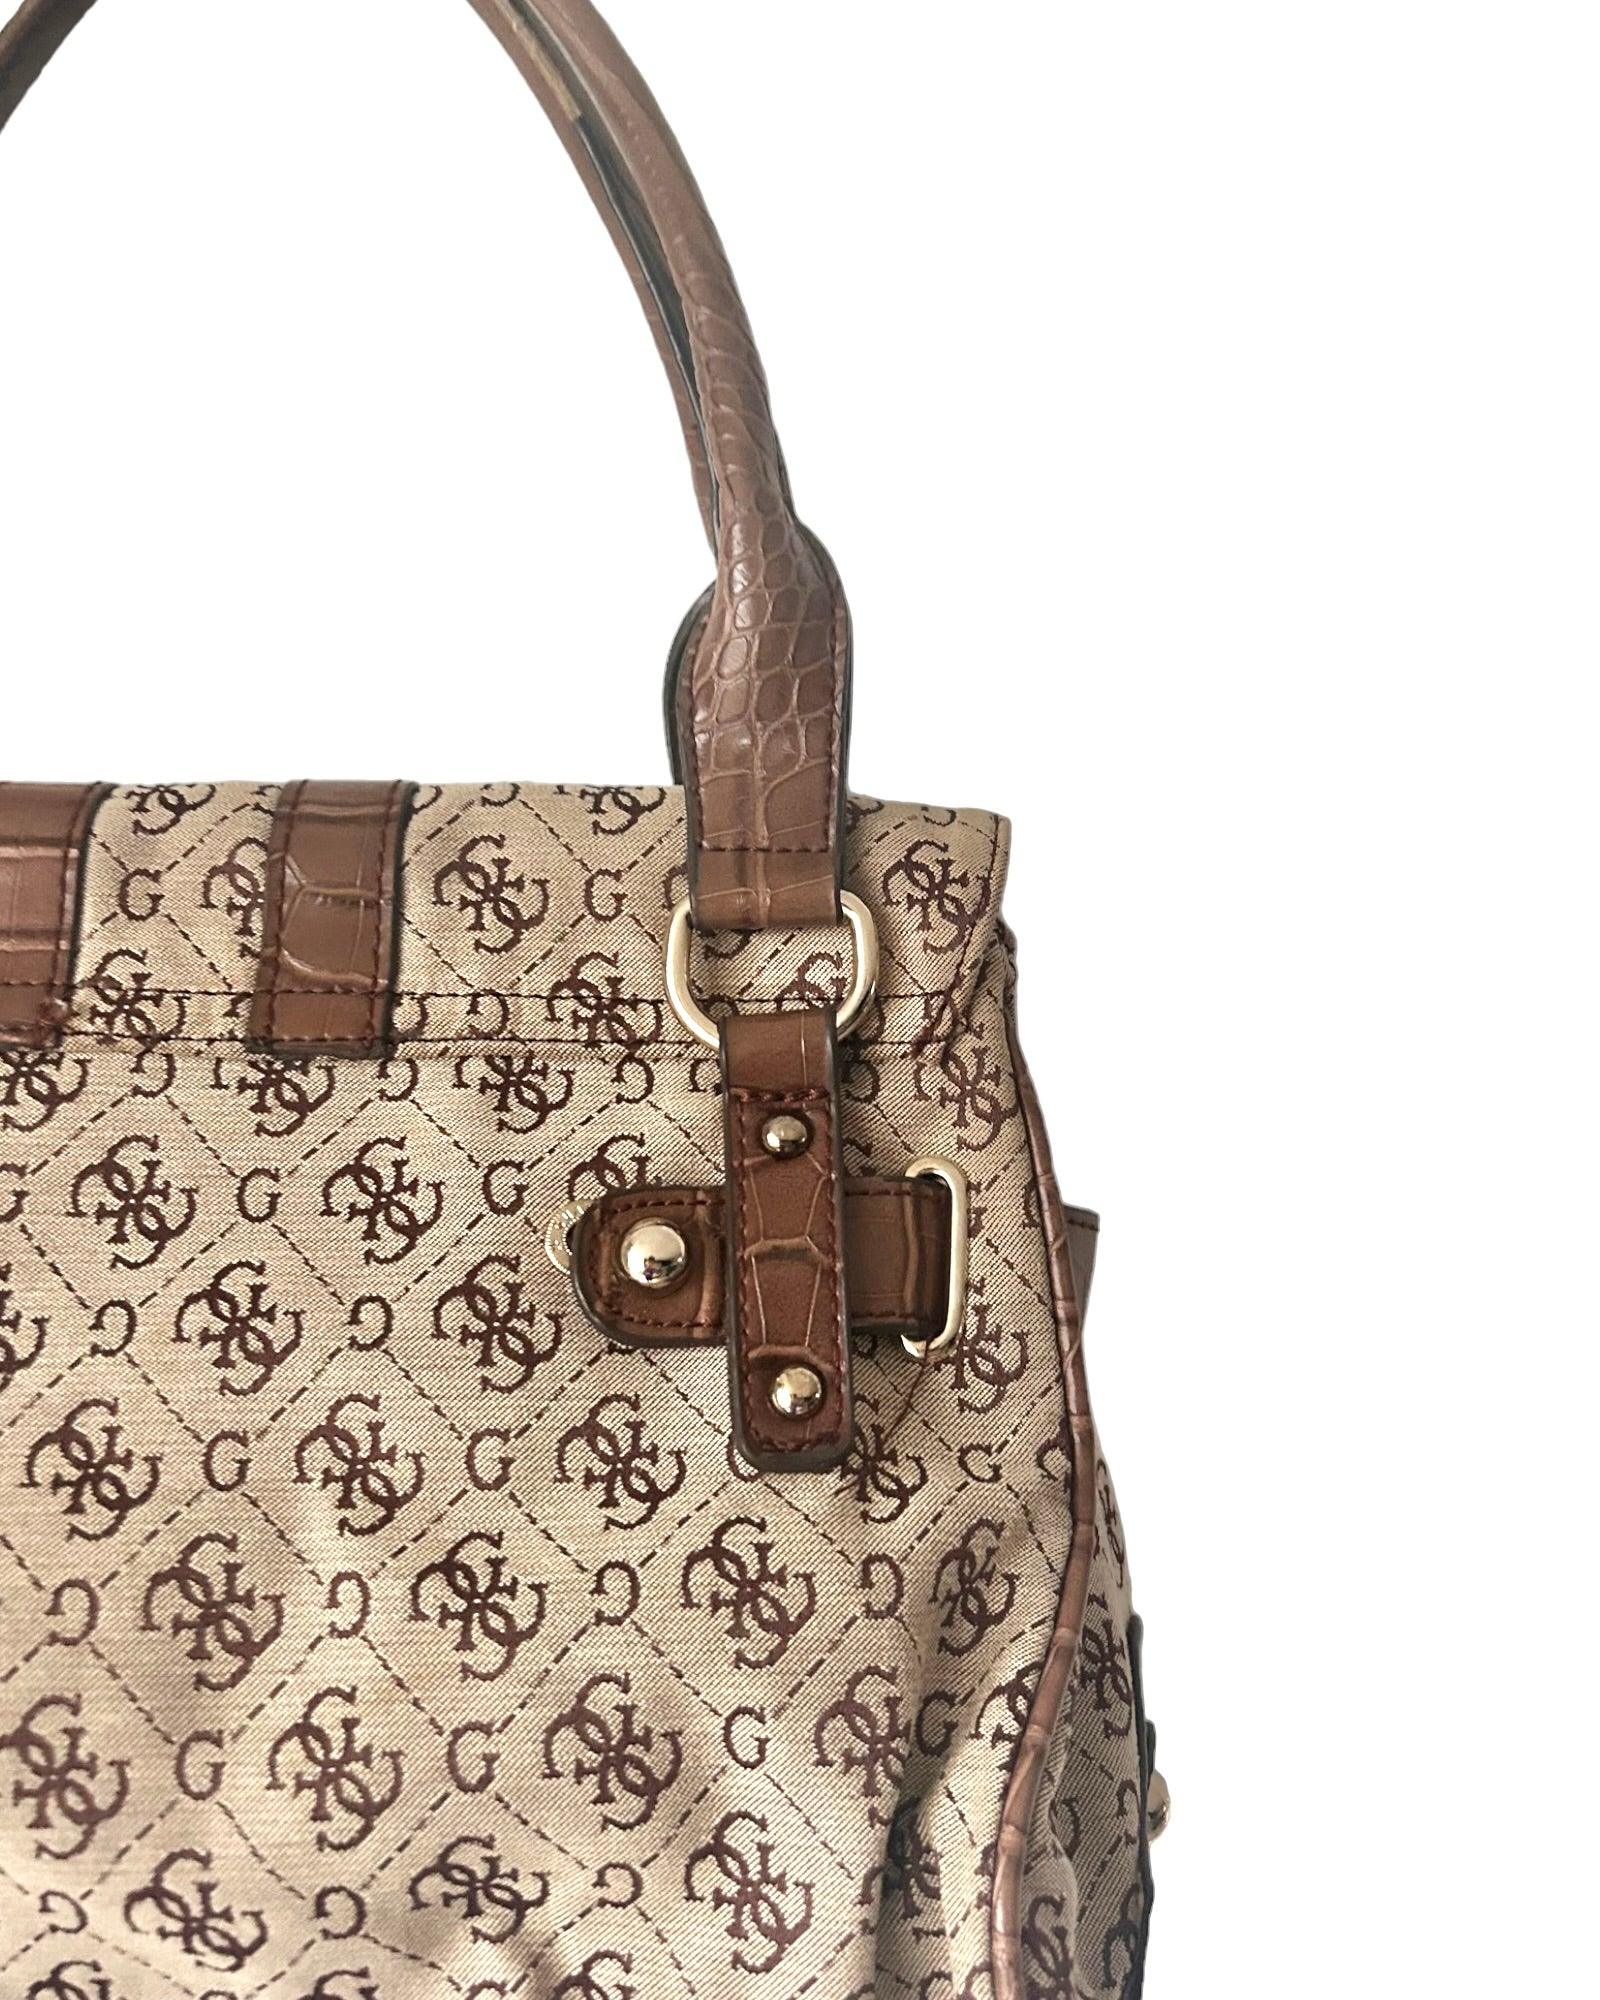 GUESS Reveal Large Brown Tote Business Bag Signature G Canvas Purse -  clothing & accessories - by owner - apparel sale...